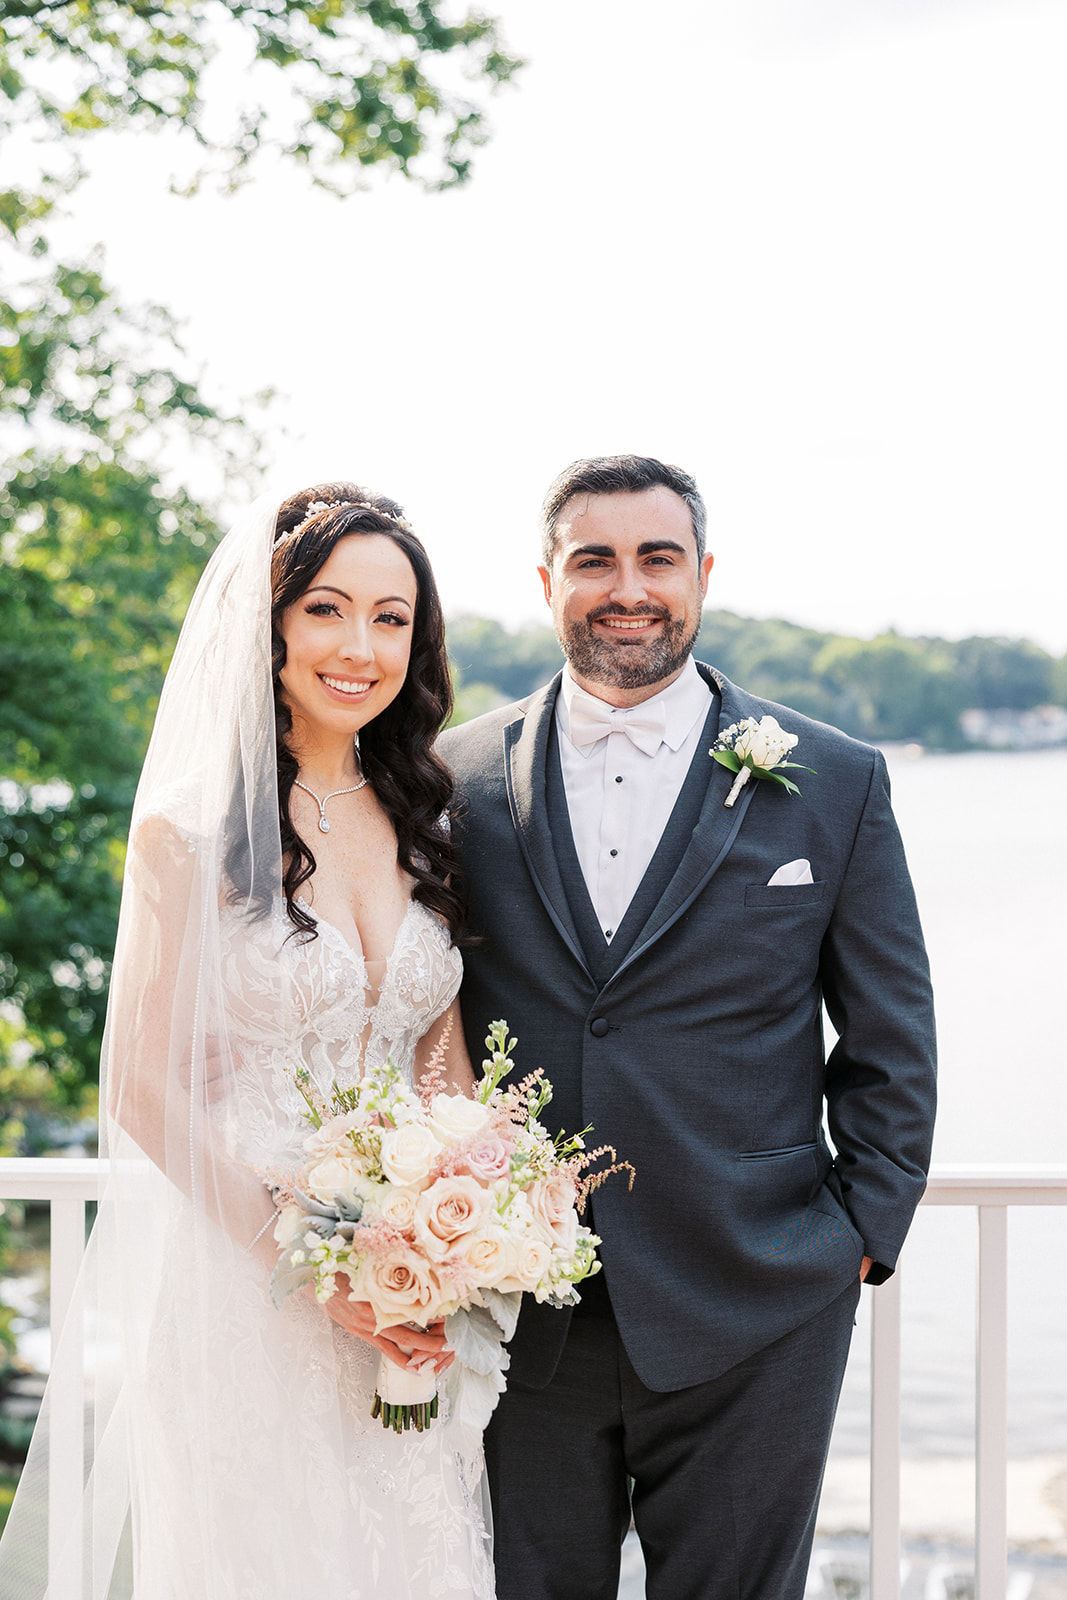 Newlyweds stand together by a lake on a patio holding a pink and white rose bouquet